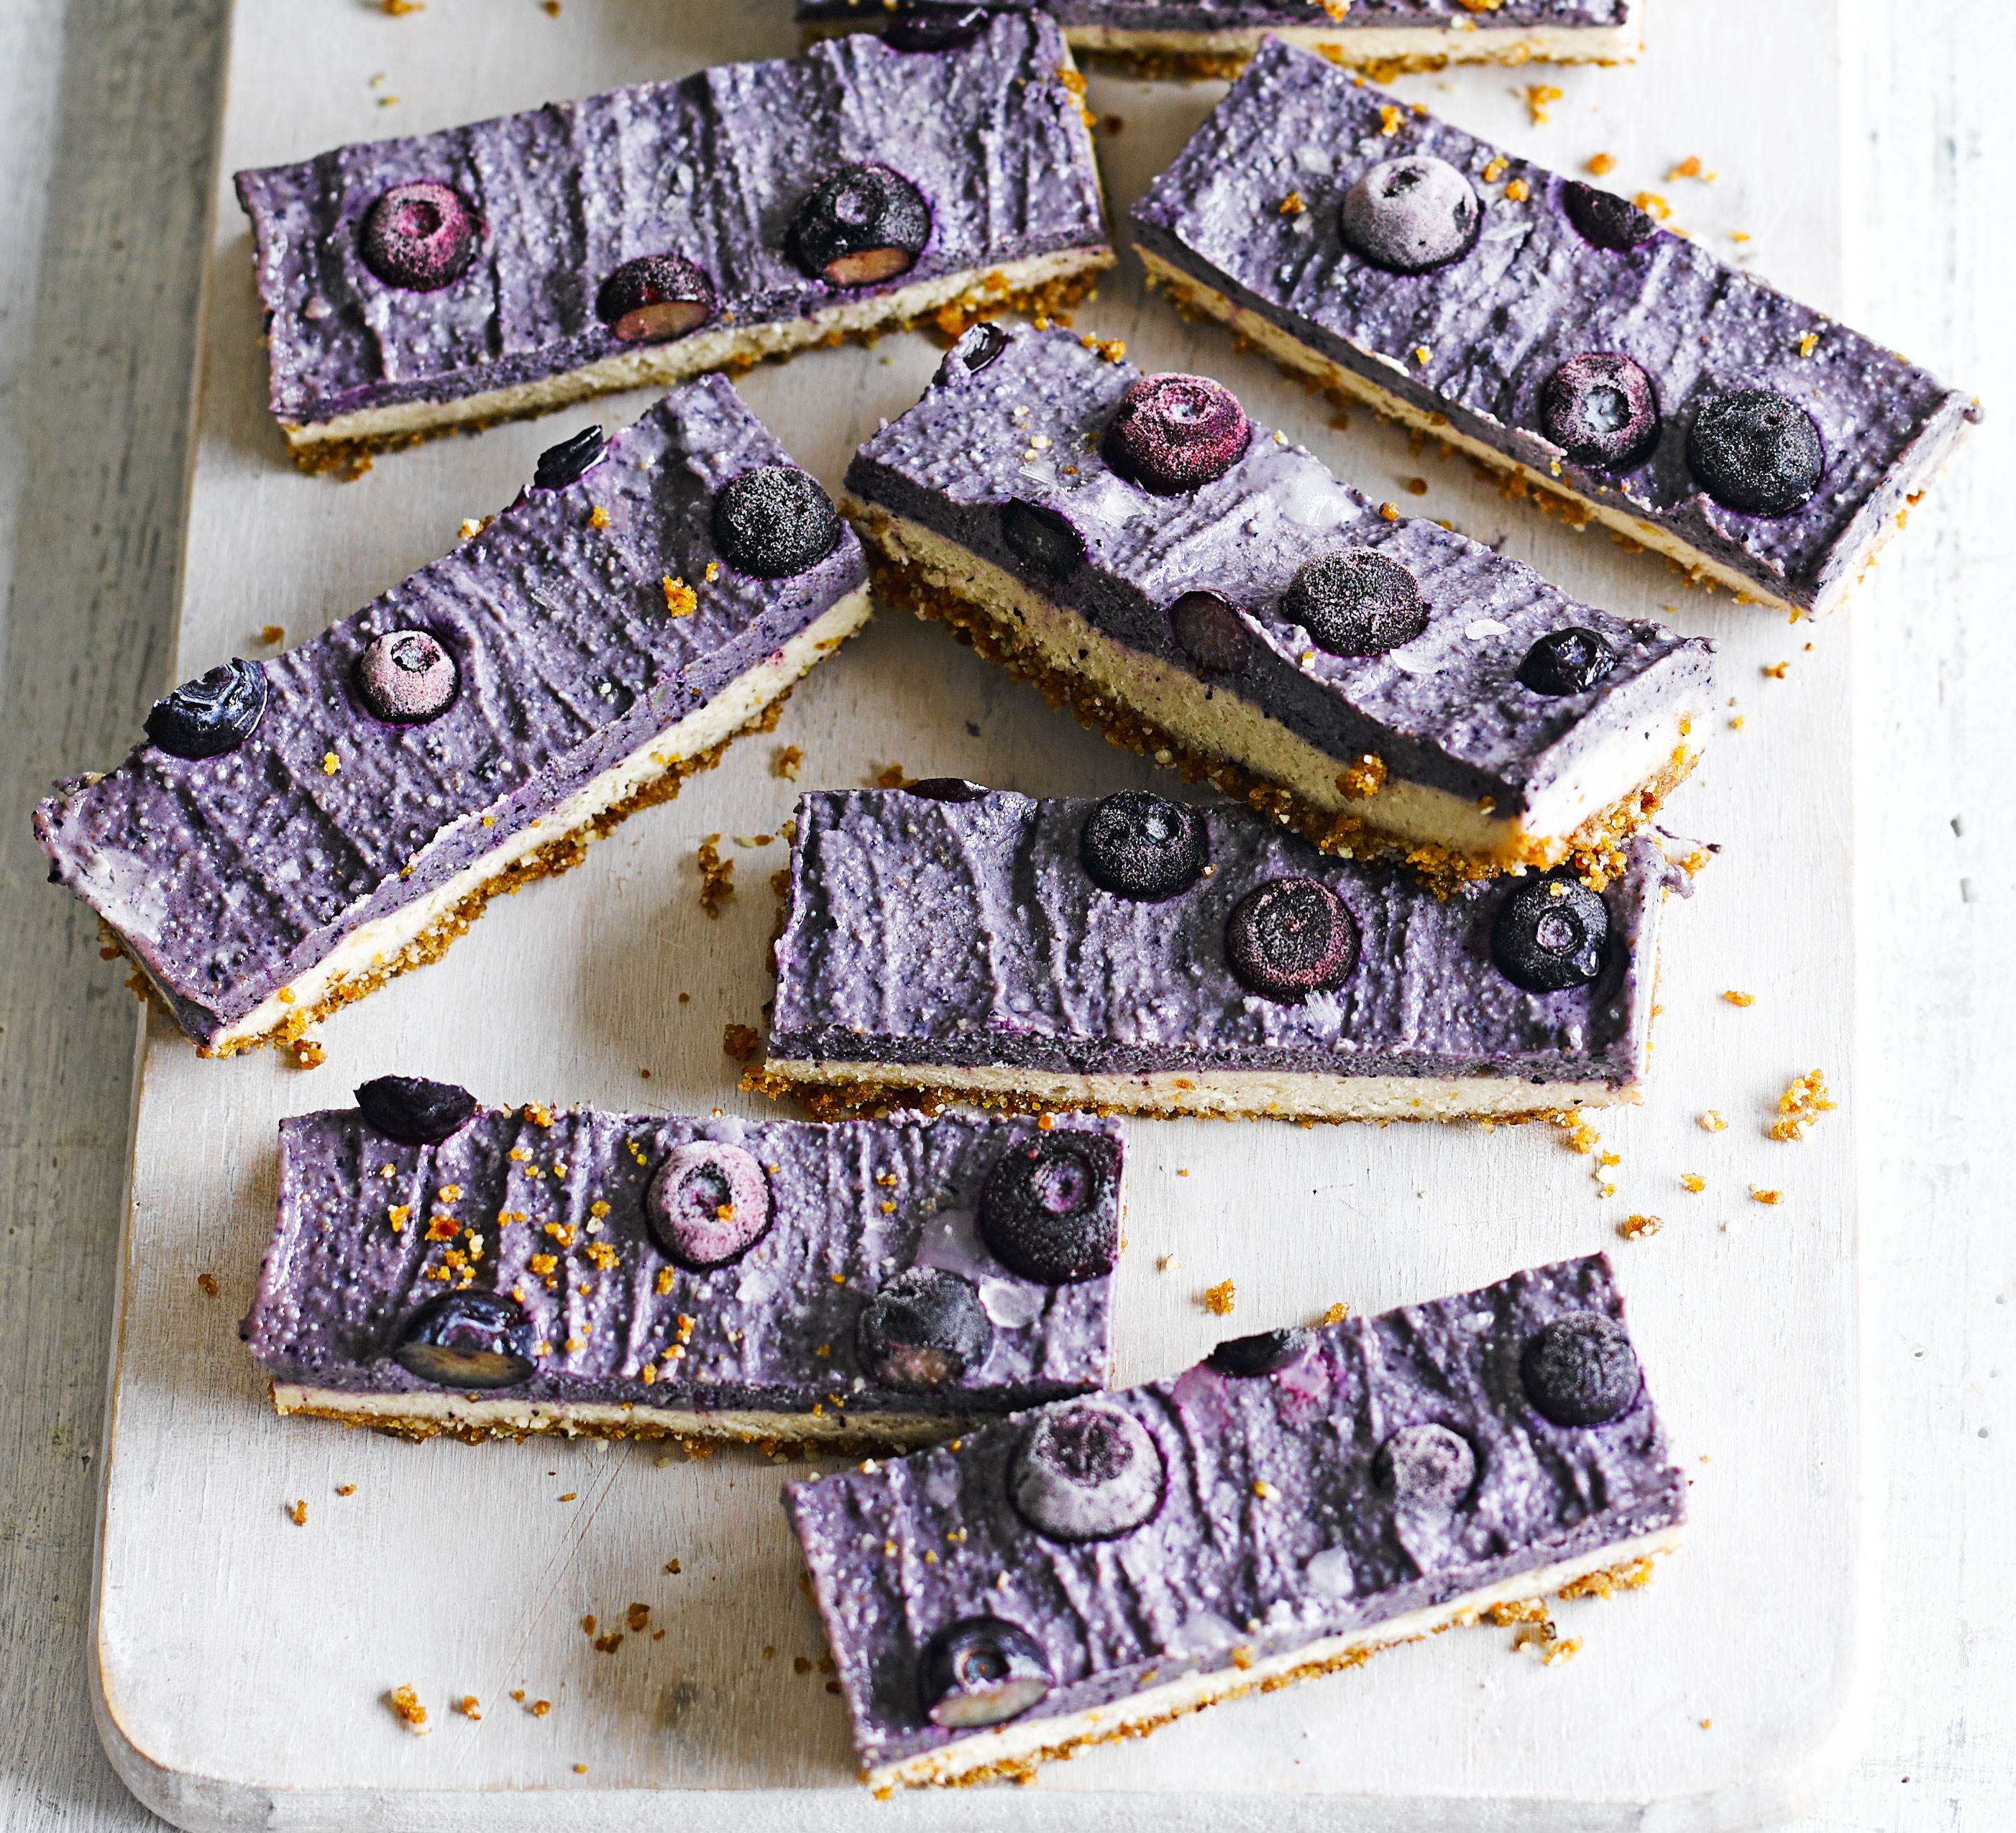 Blueberry & coconut frozen ‘cheesecake’ bars